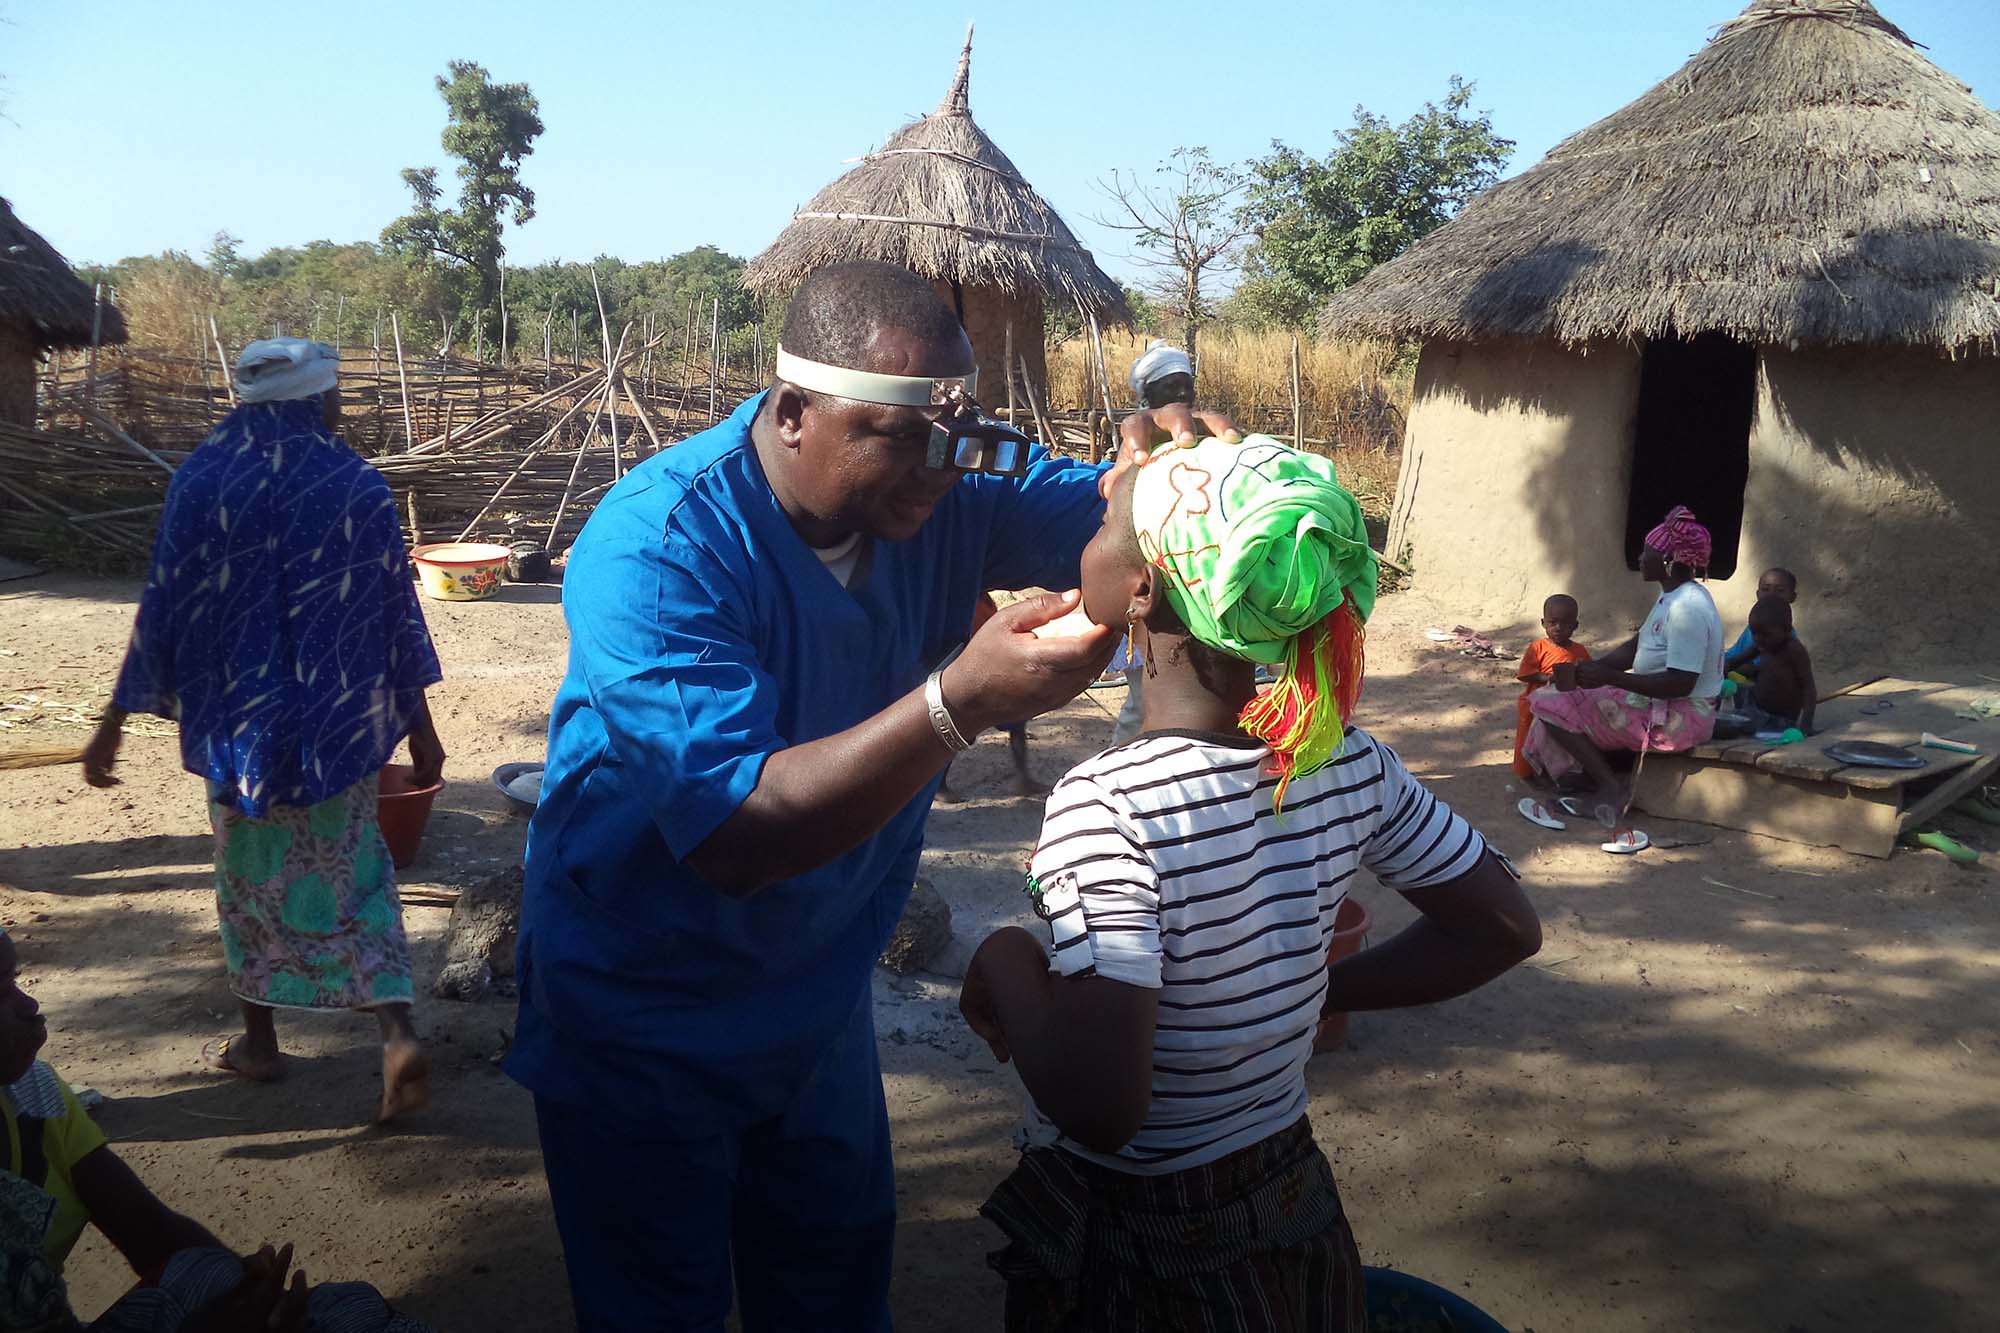 Health worker examining someone for trachoma.